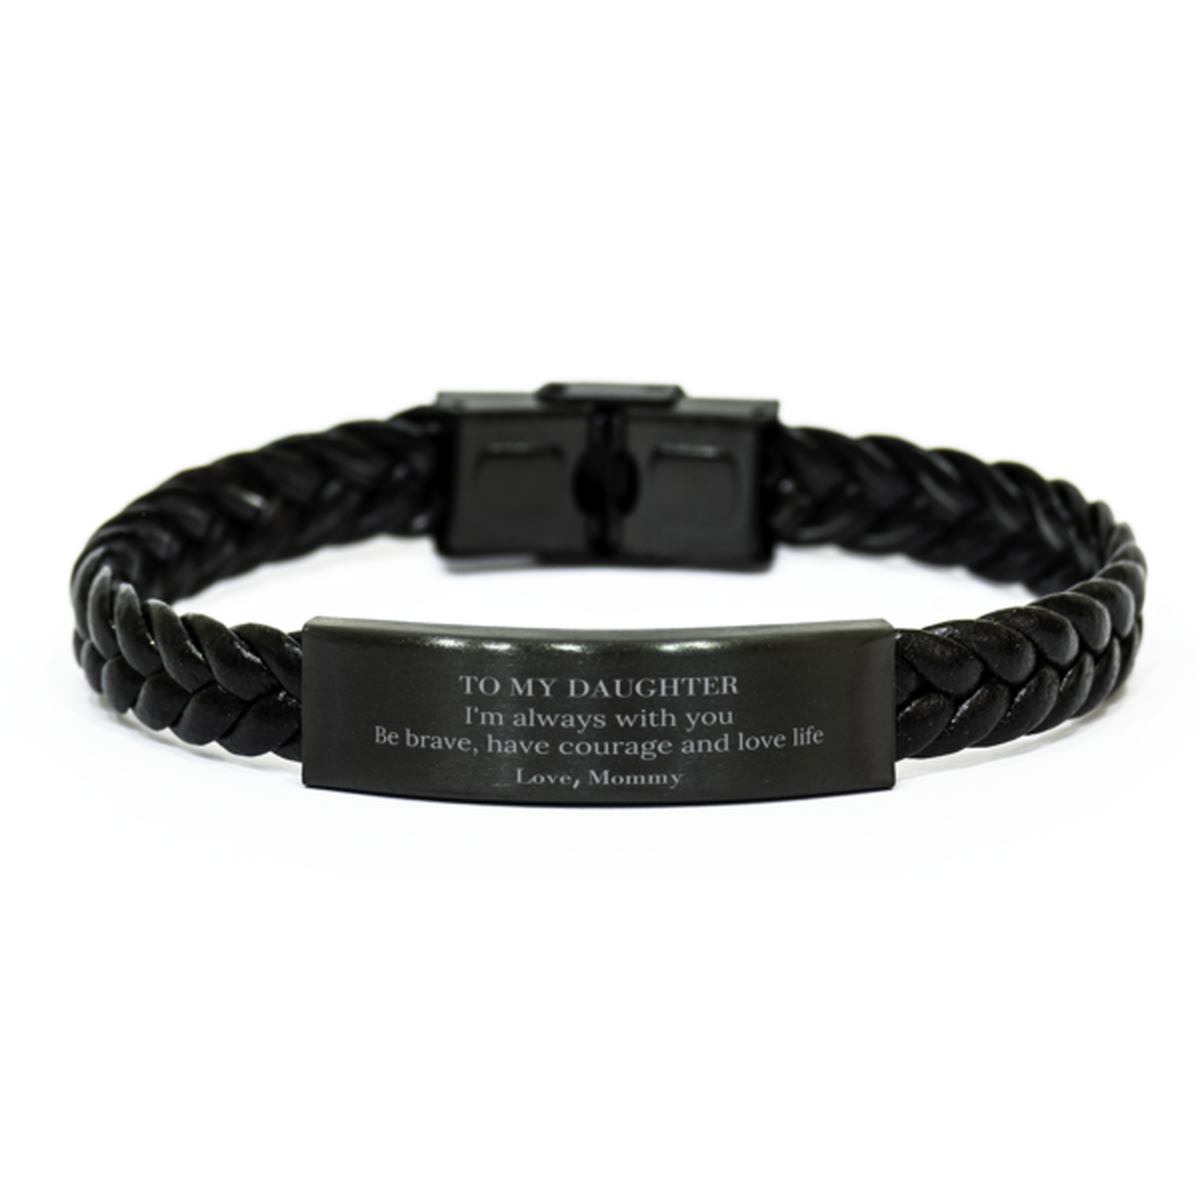 To My Daughter Gifts from Mommy, Unique Braided Leather Bracelet Inspirational Christmas Birthday Graduation Gifts for Daughter I'm always with you. Be brave, have courage and love life. Love, Mommy